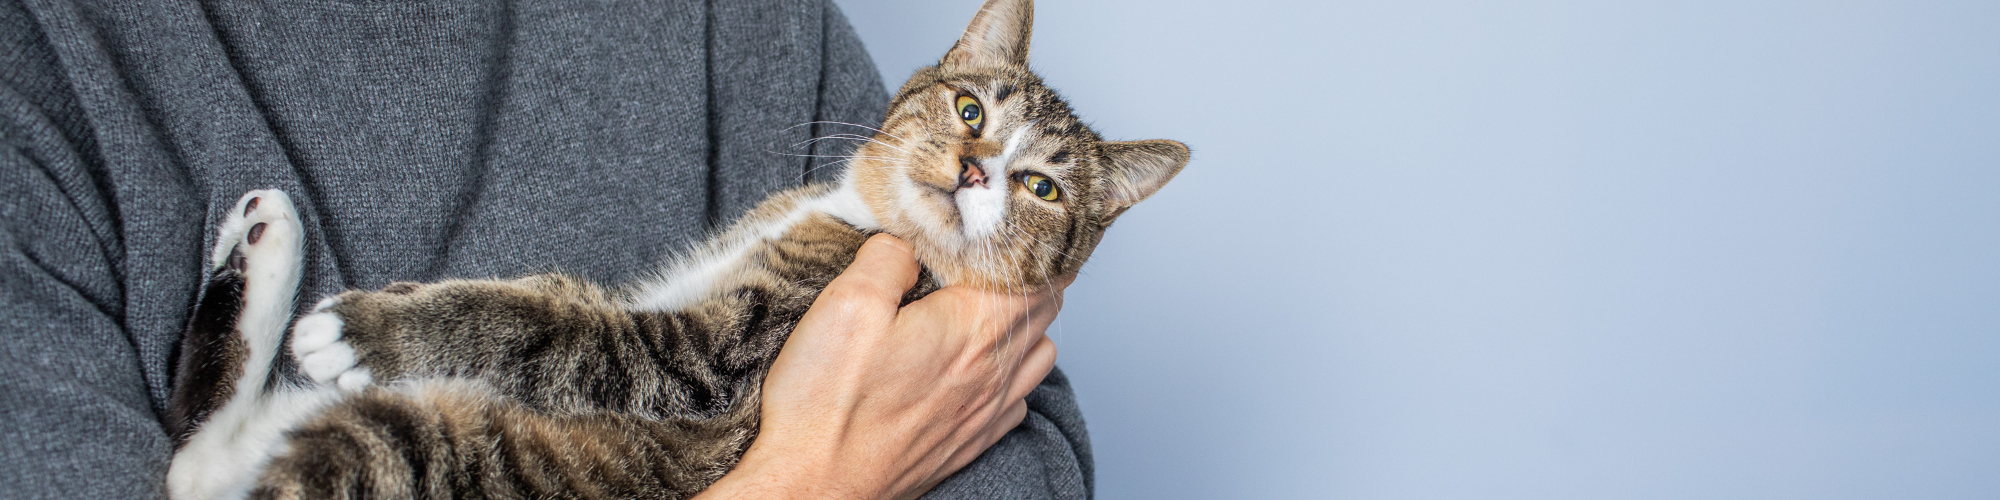 Four Tips To Prepare Your Cat For A Vet Visit